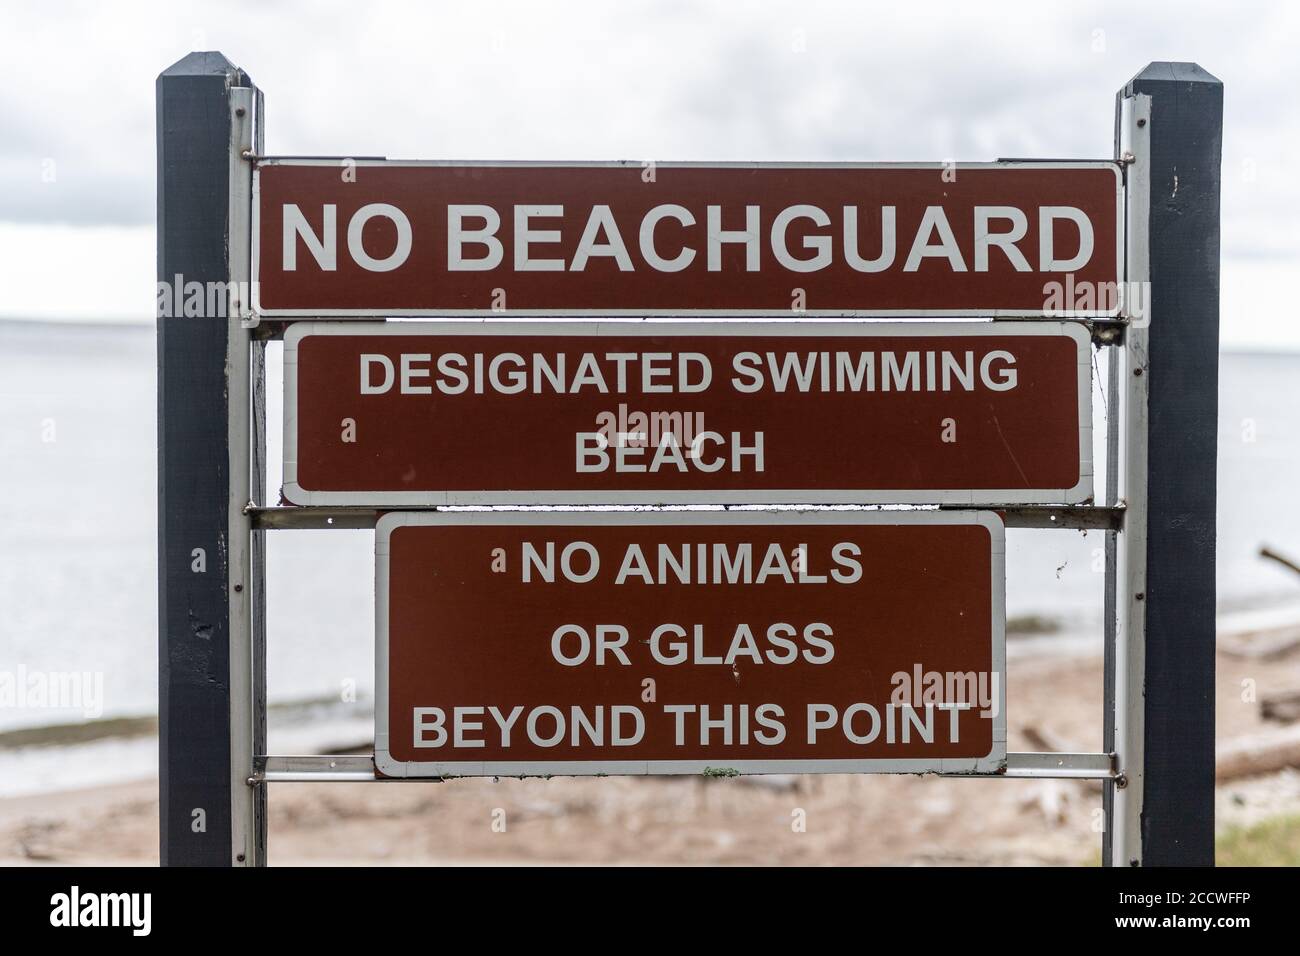 A sign that says no beachguard deisignated swimming beach and no animals or glass beyond this point Stock Photo